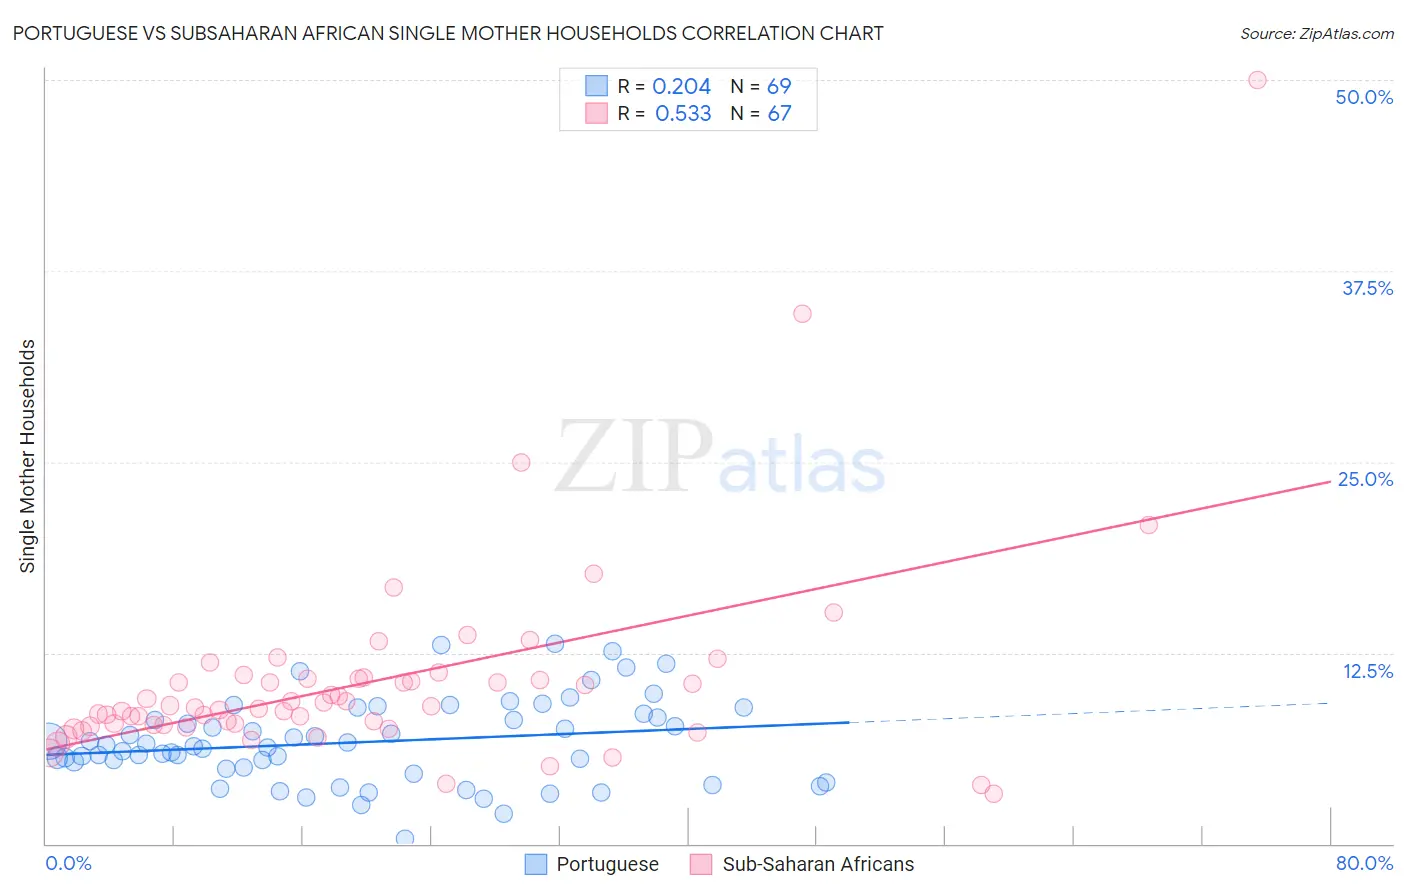 Portuguese vs Subsaharan African Single Mother Households